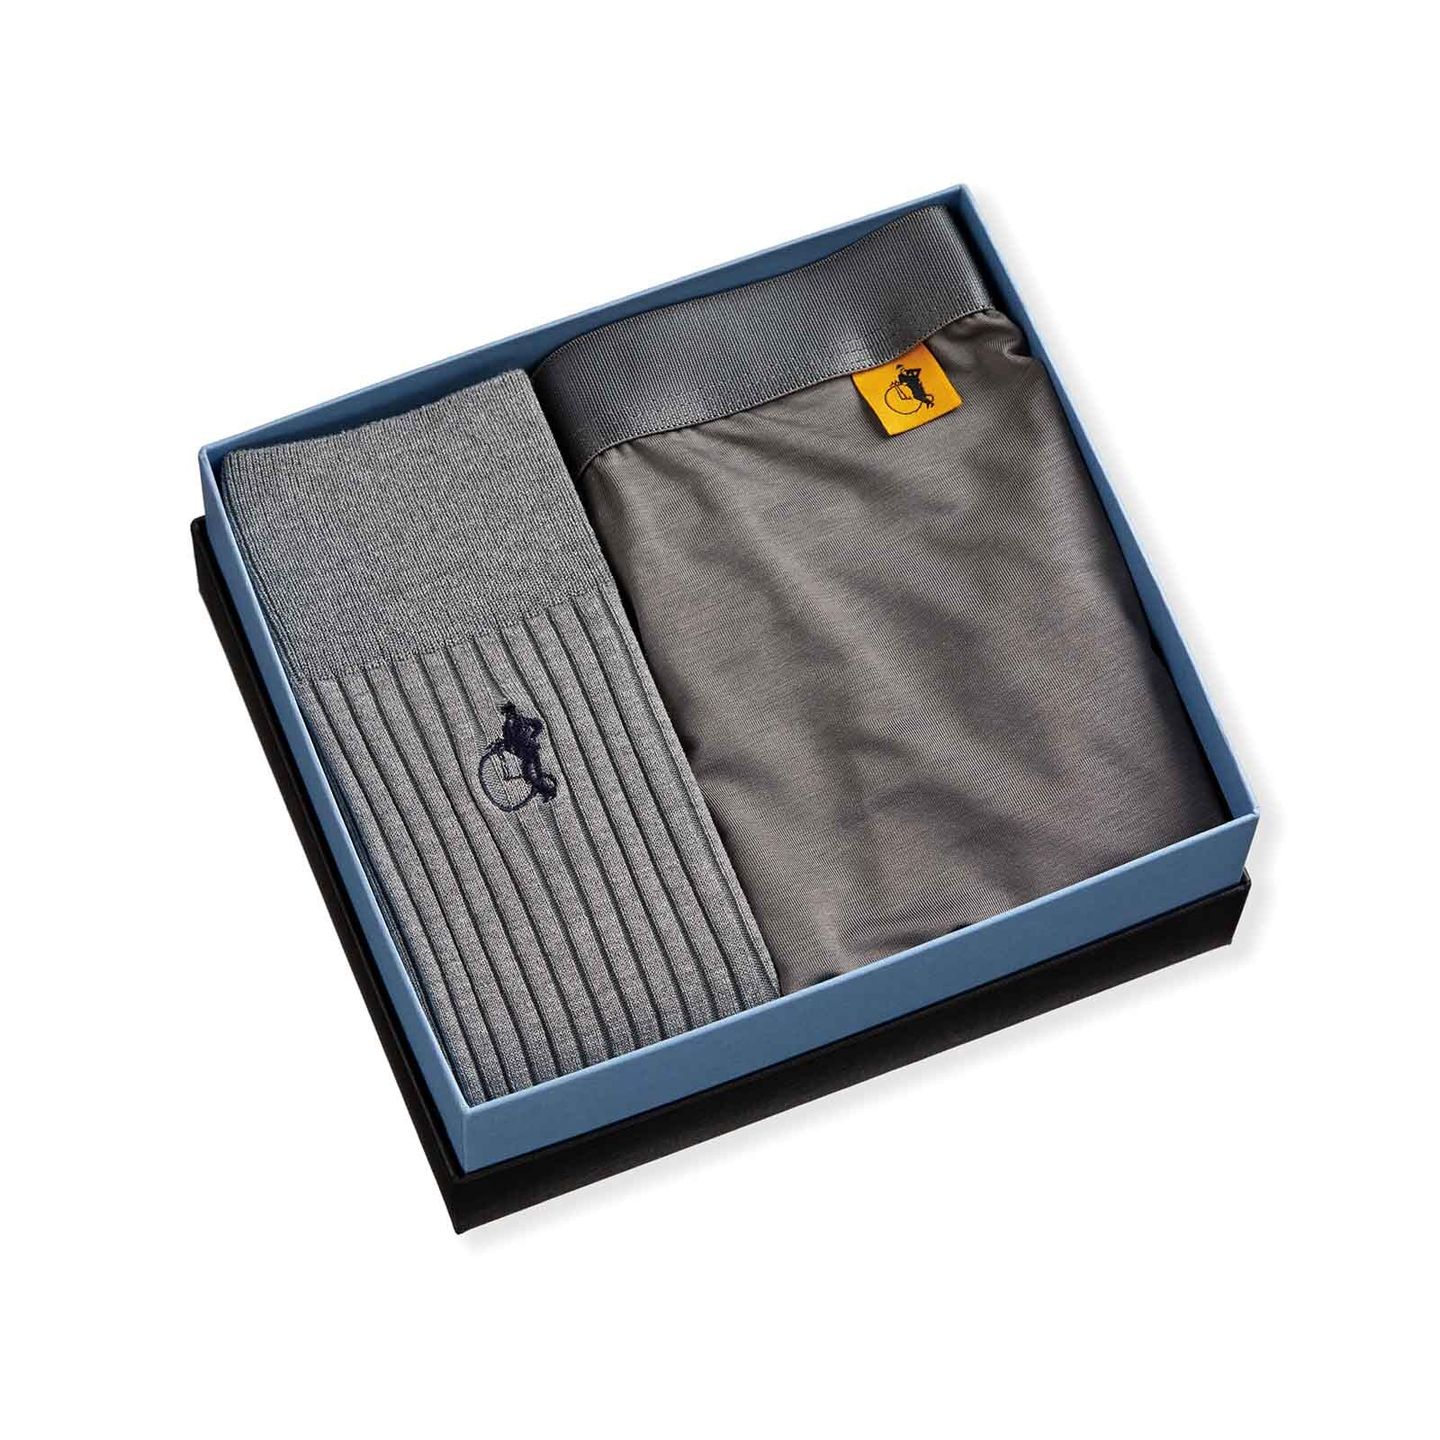 A collection of a pair of socks and boxers in a box